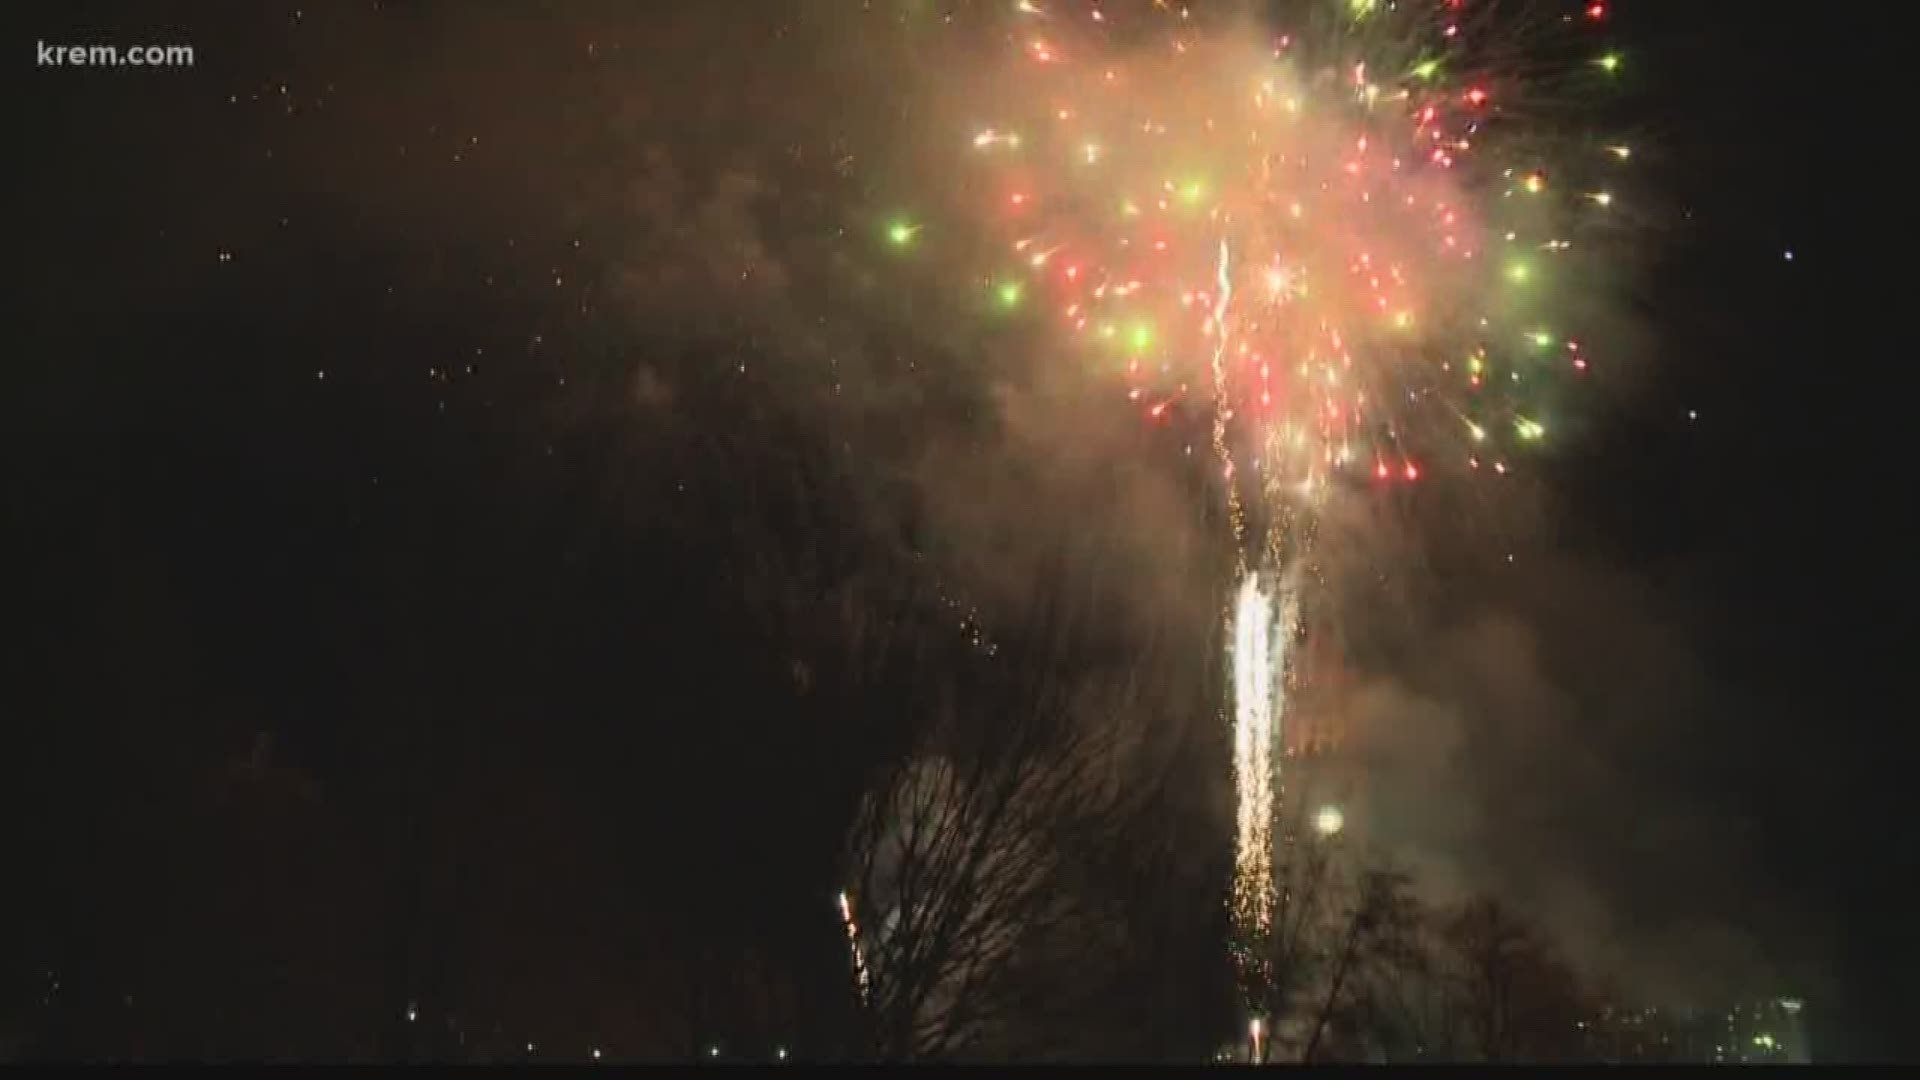 The City of Spokane estimates about 1,200 people actually watched the New Year's Eve fireworks show, which started at 9 p.m. instead of midnight.